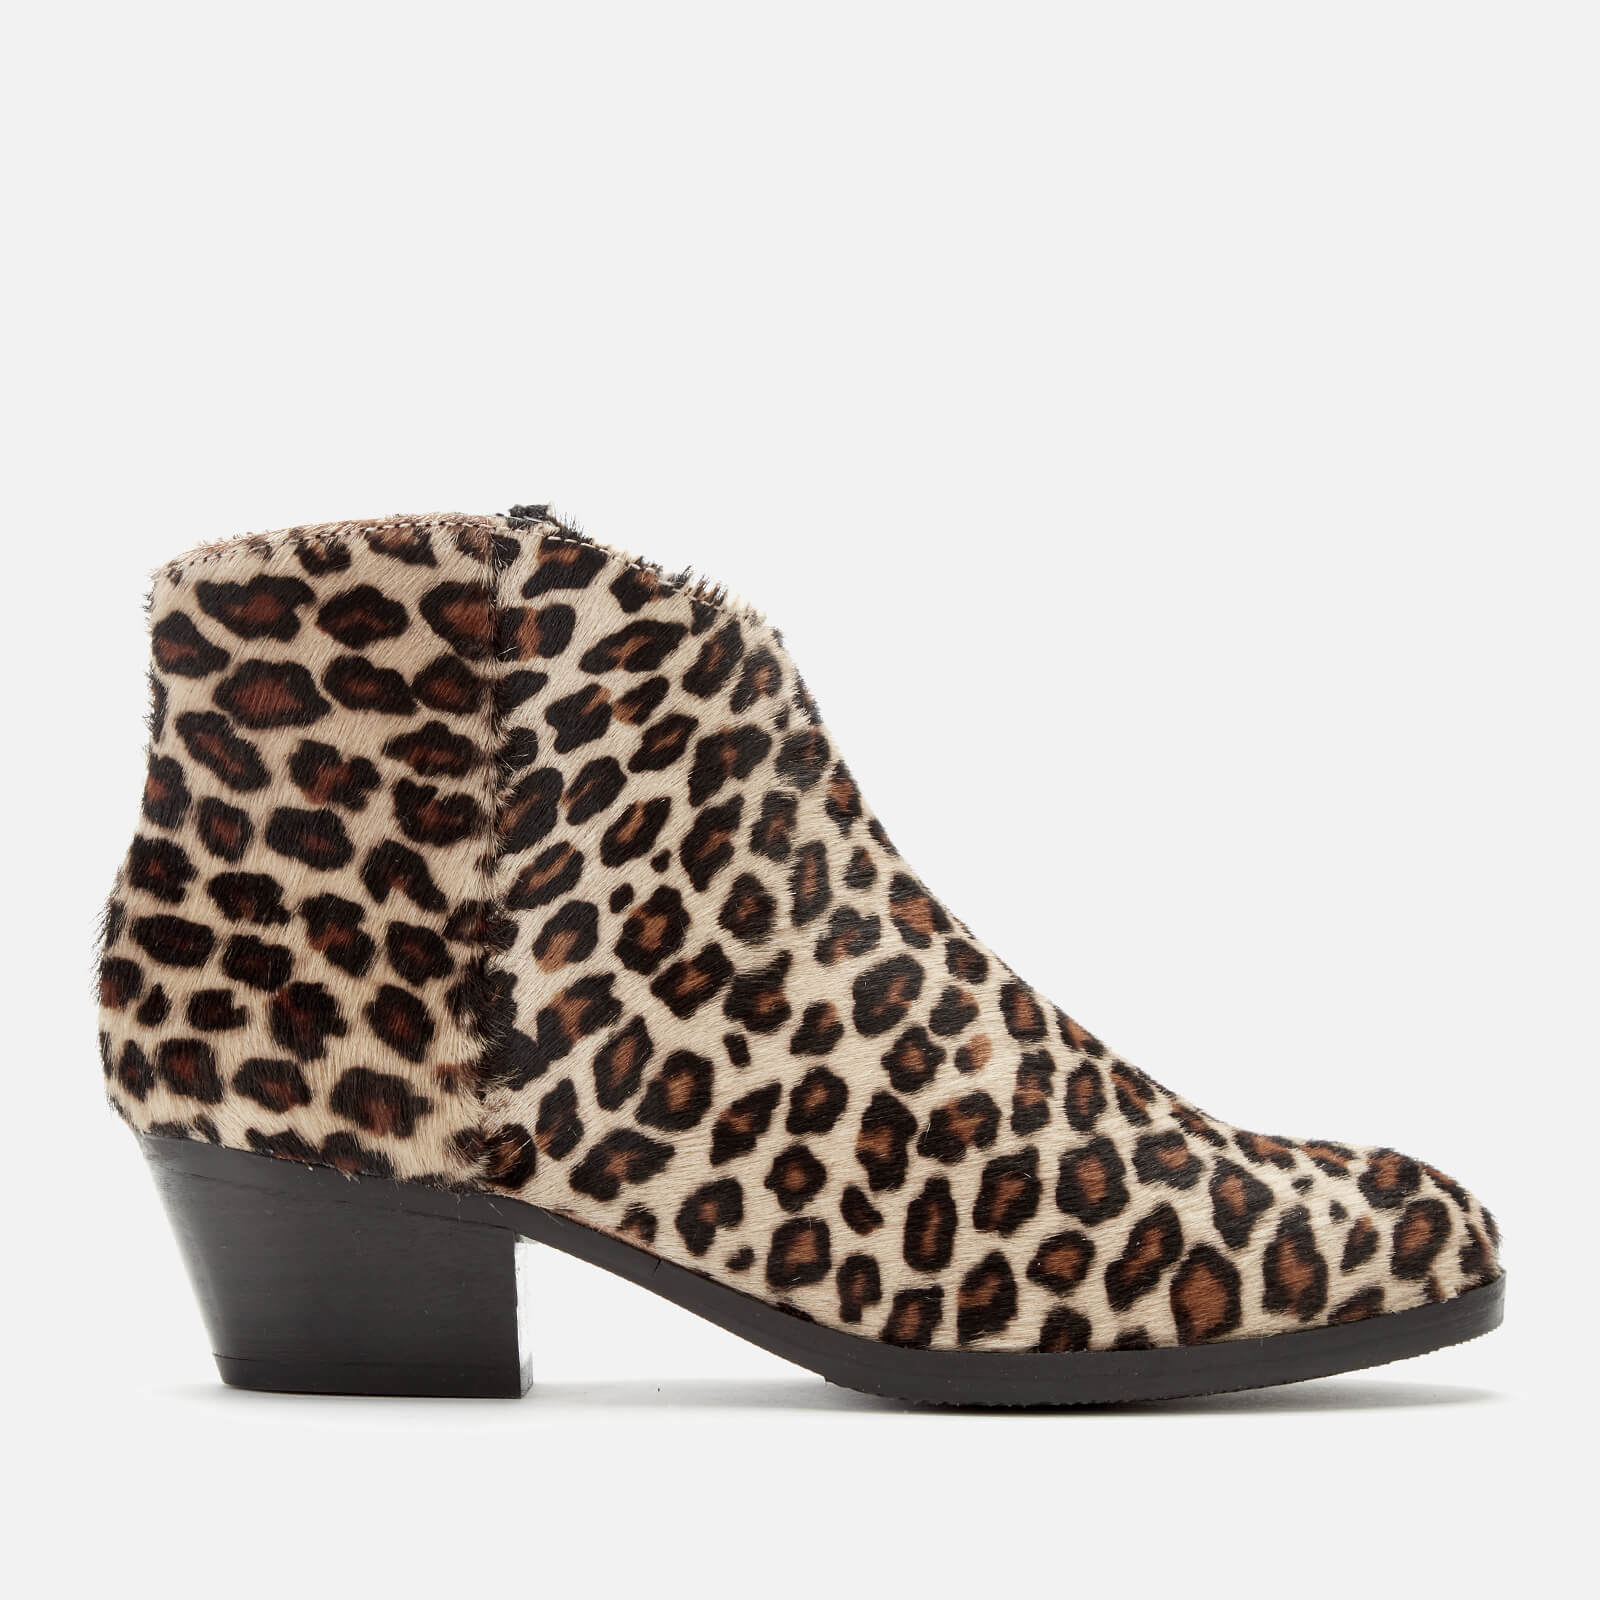 clarks high ankle boots